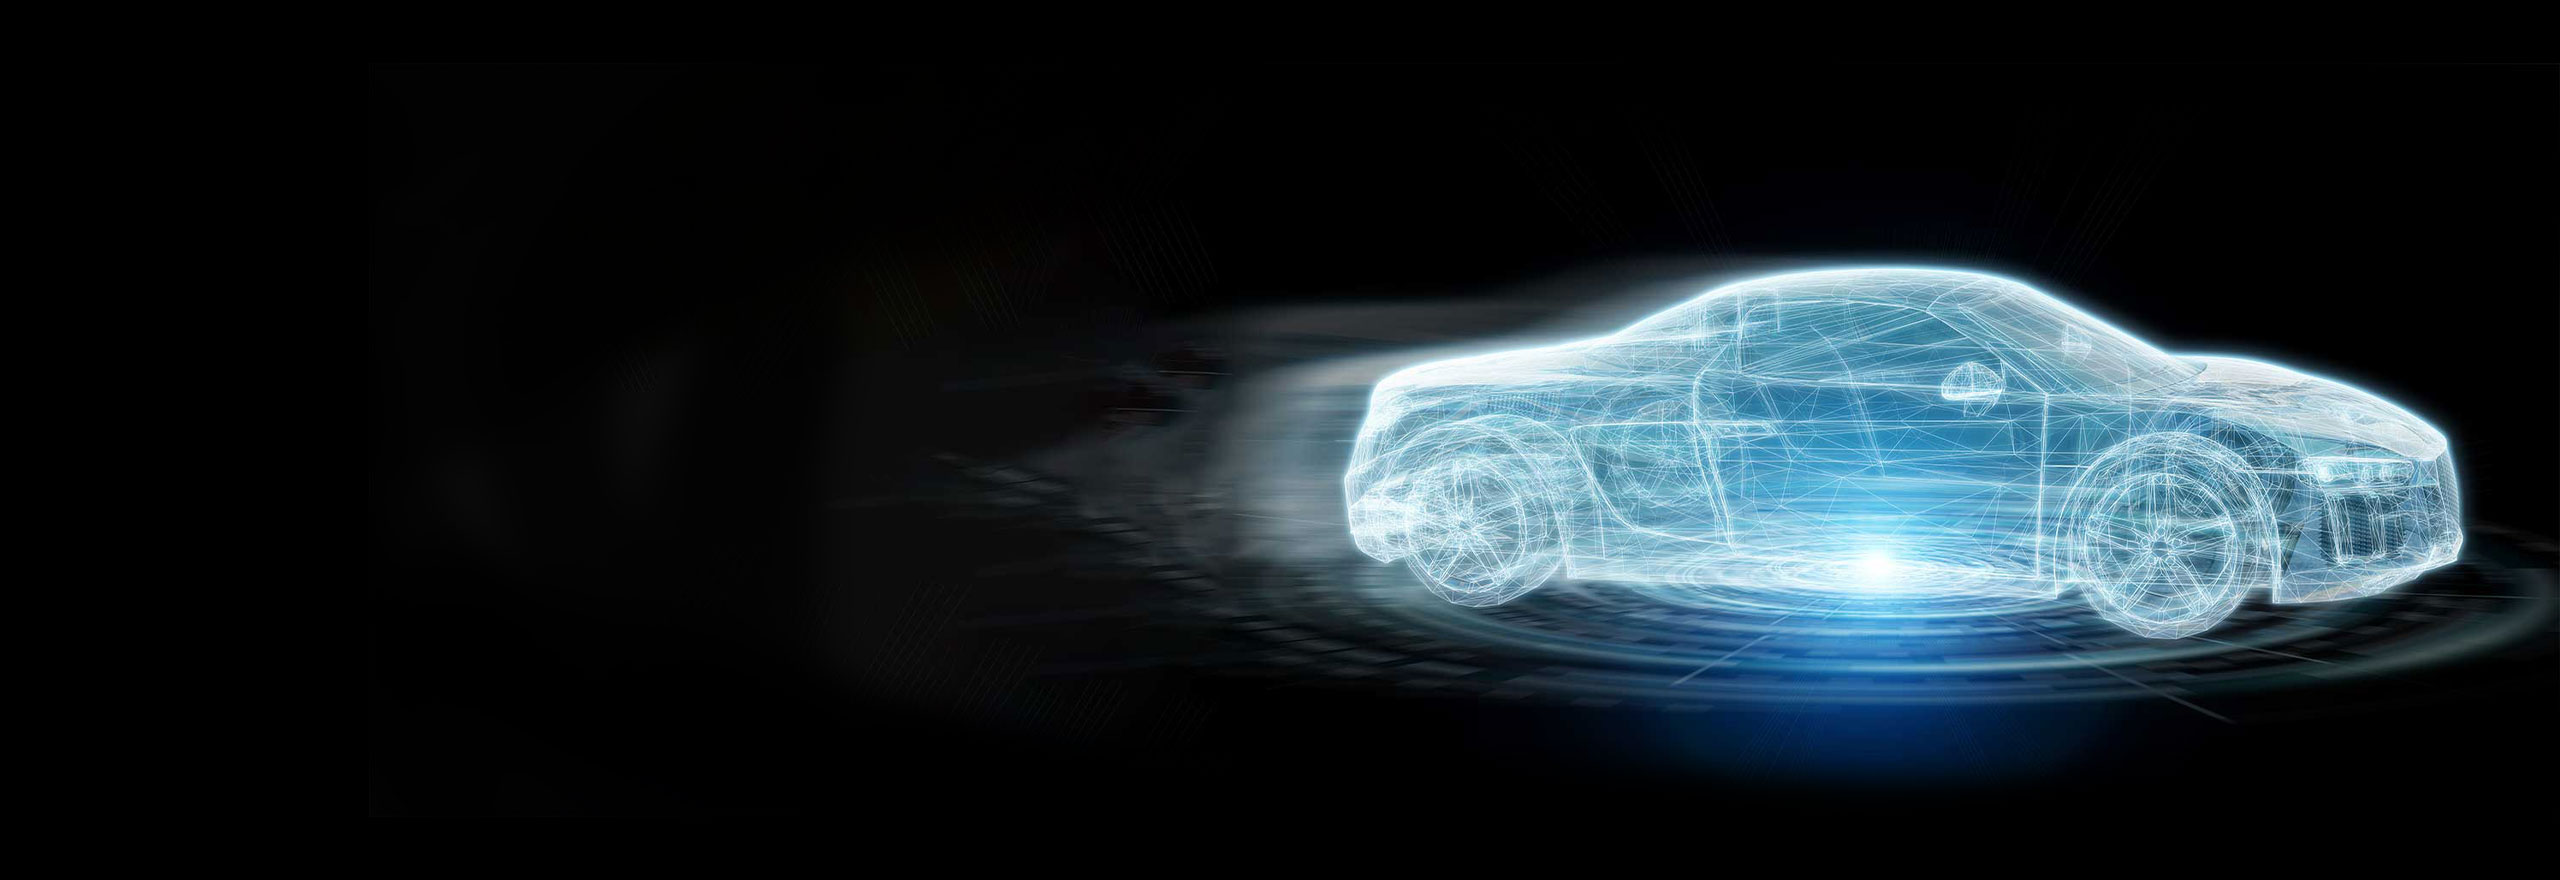 conceptual image of an electric vehicle